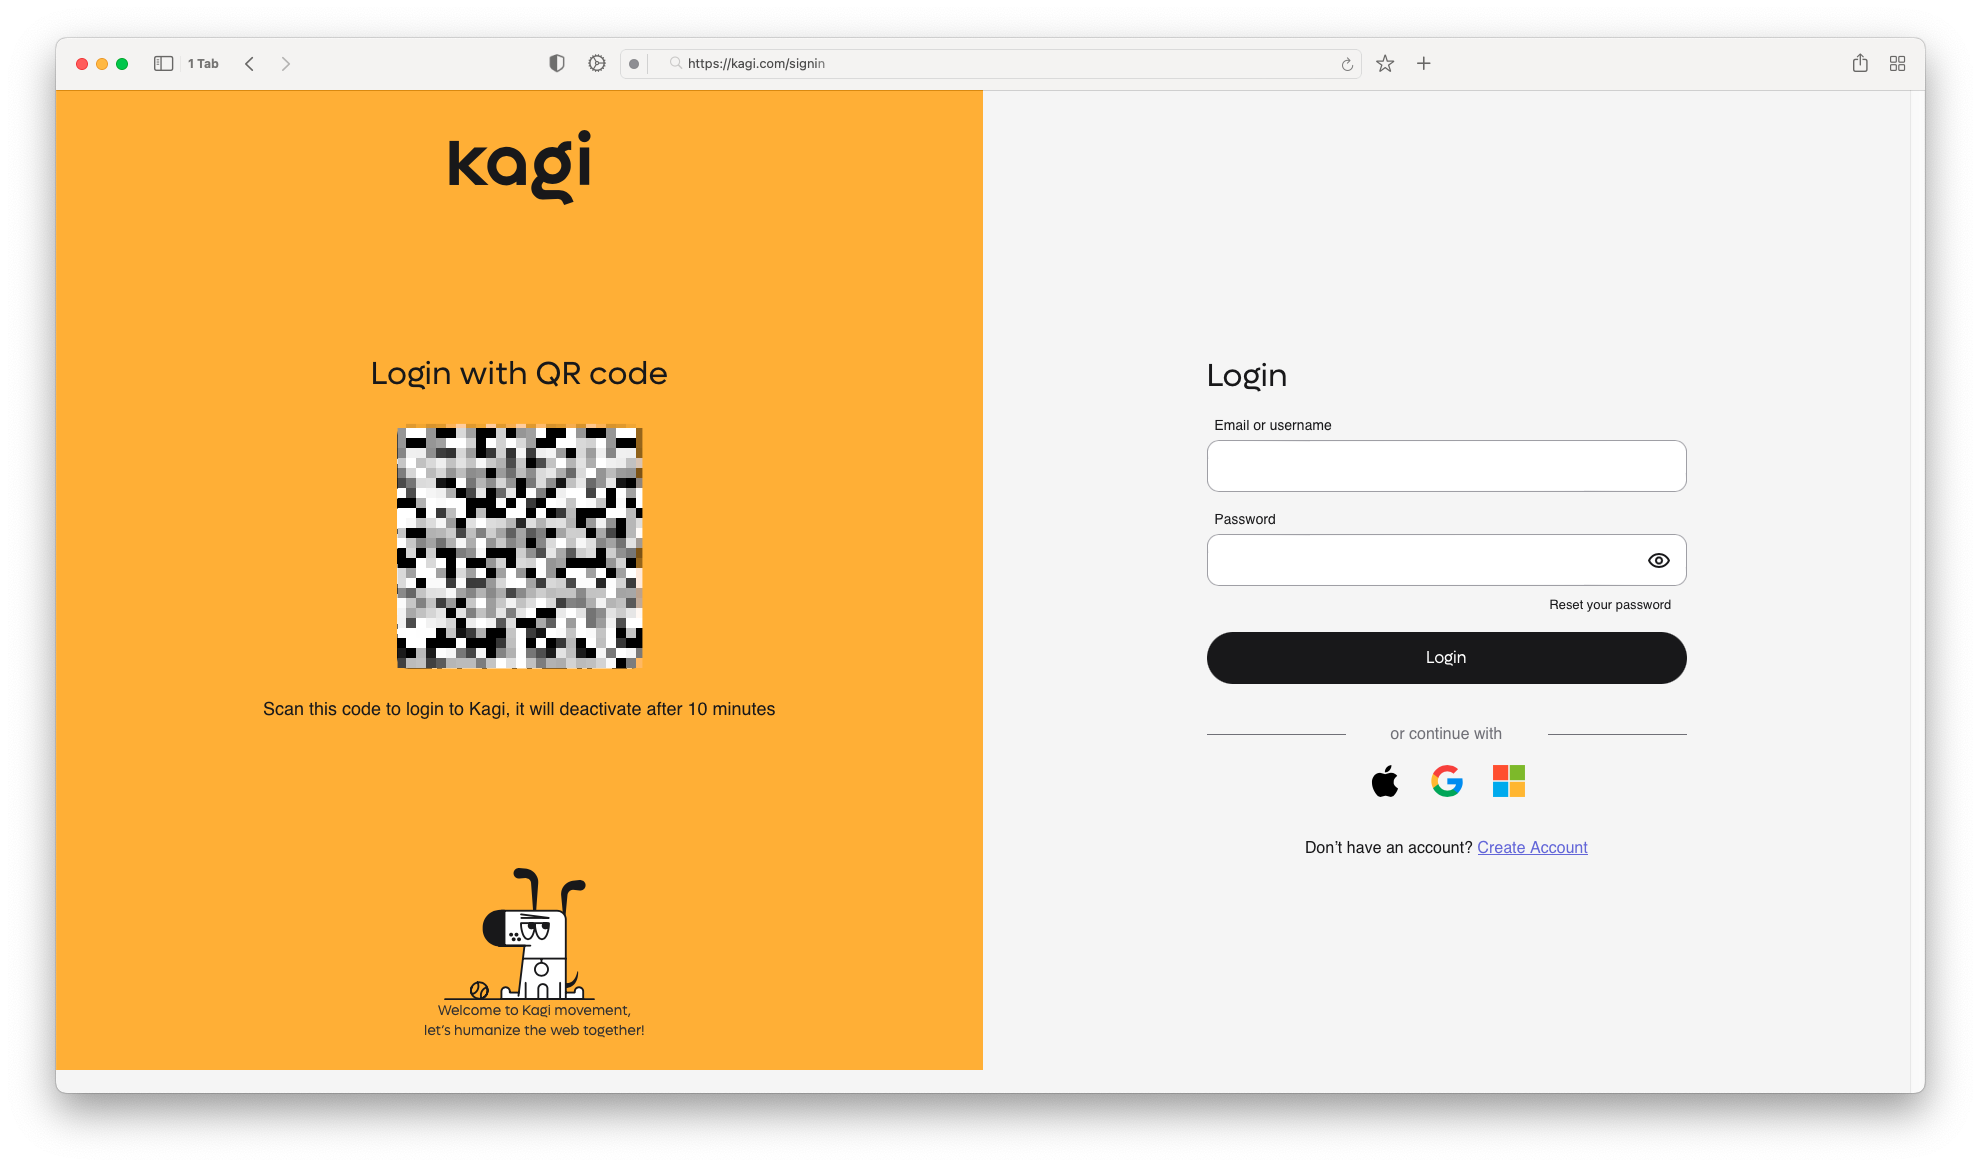 Log in with QR code